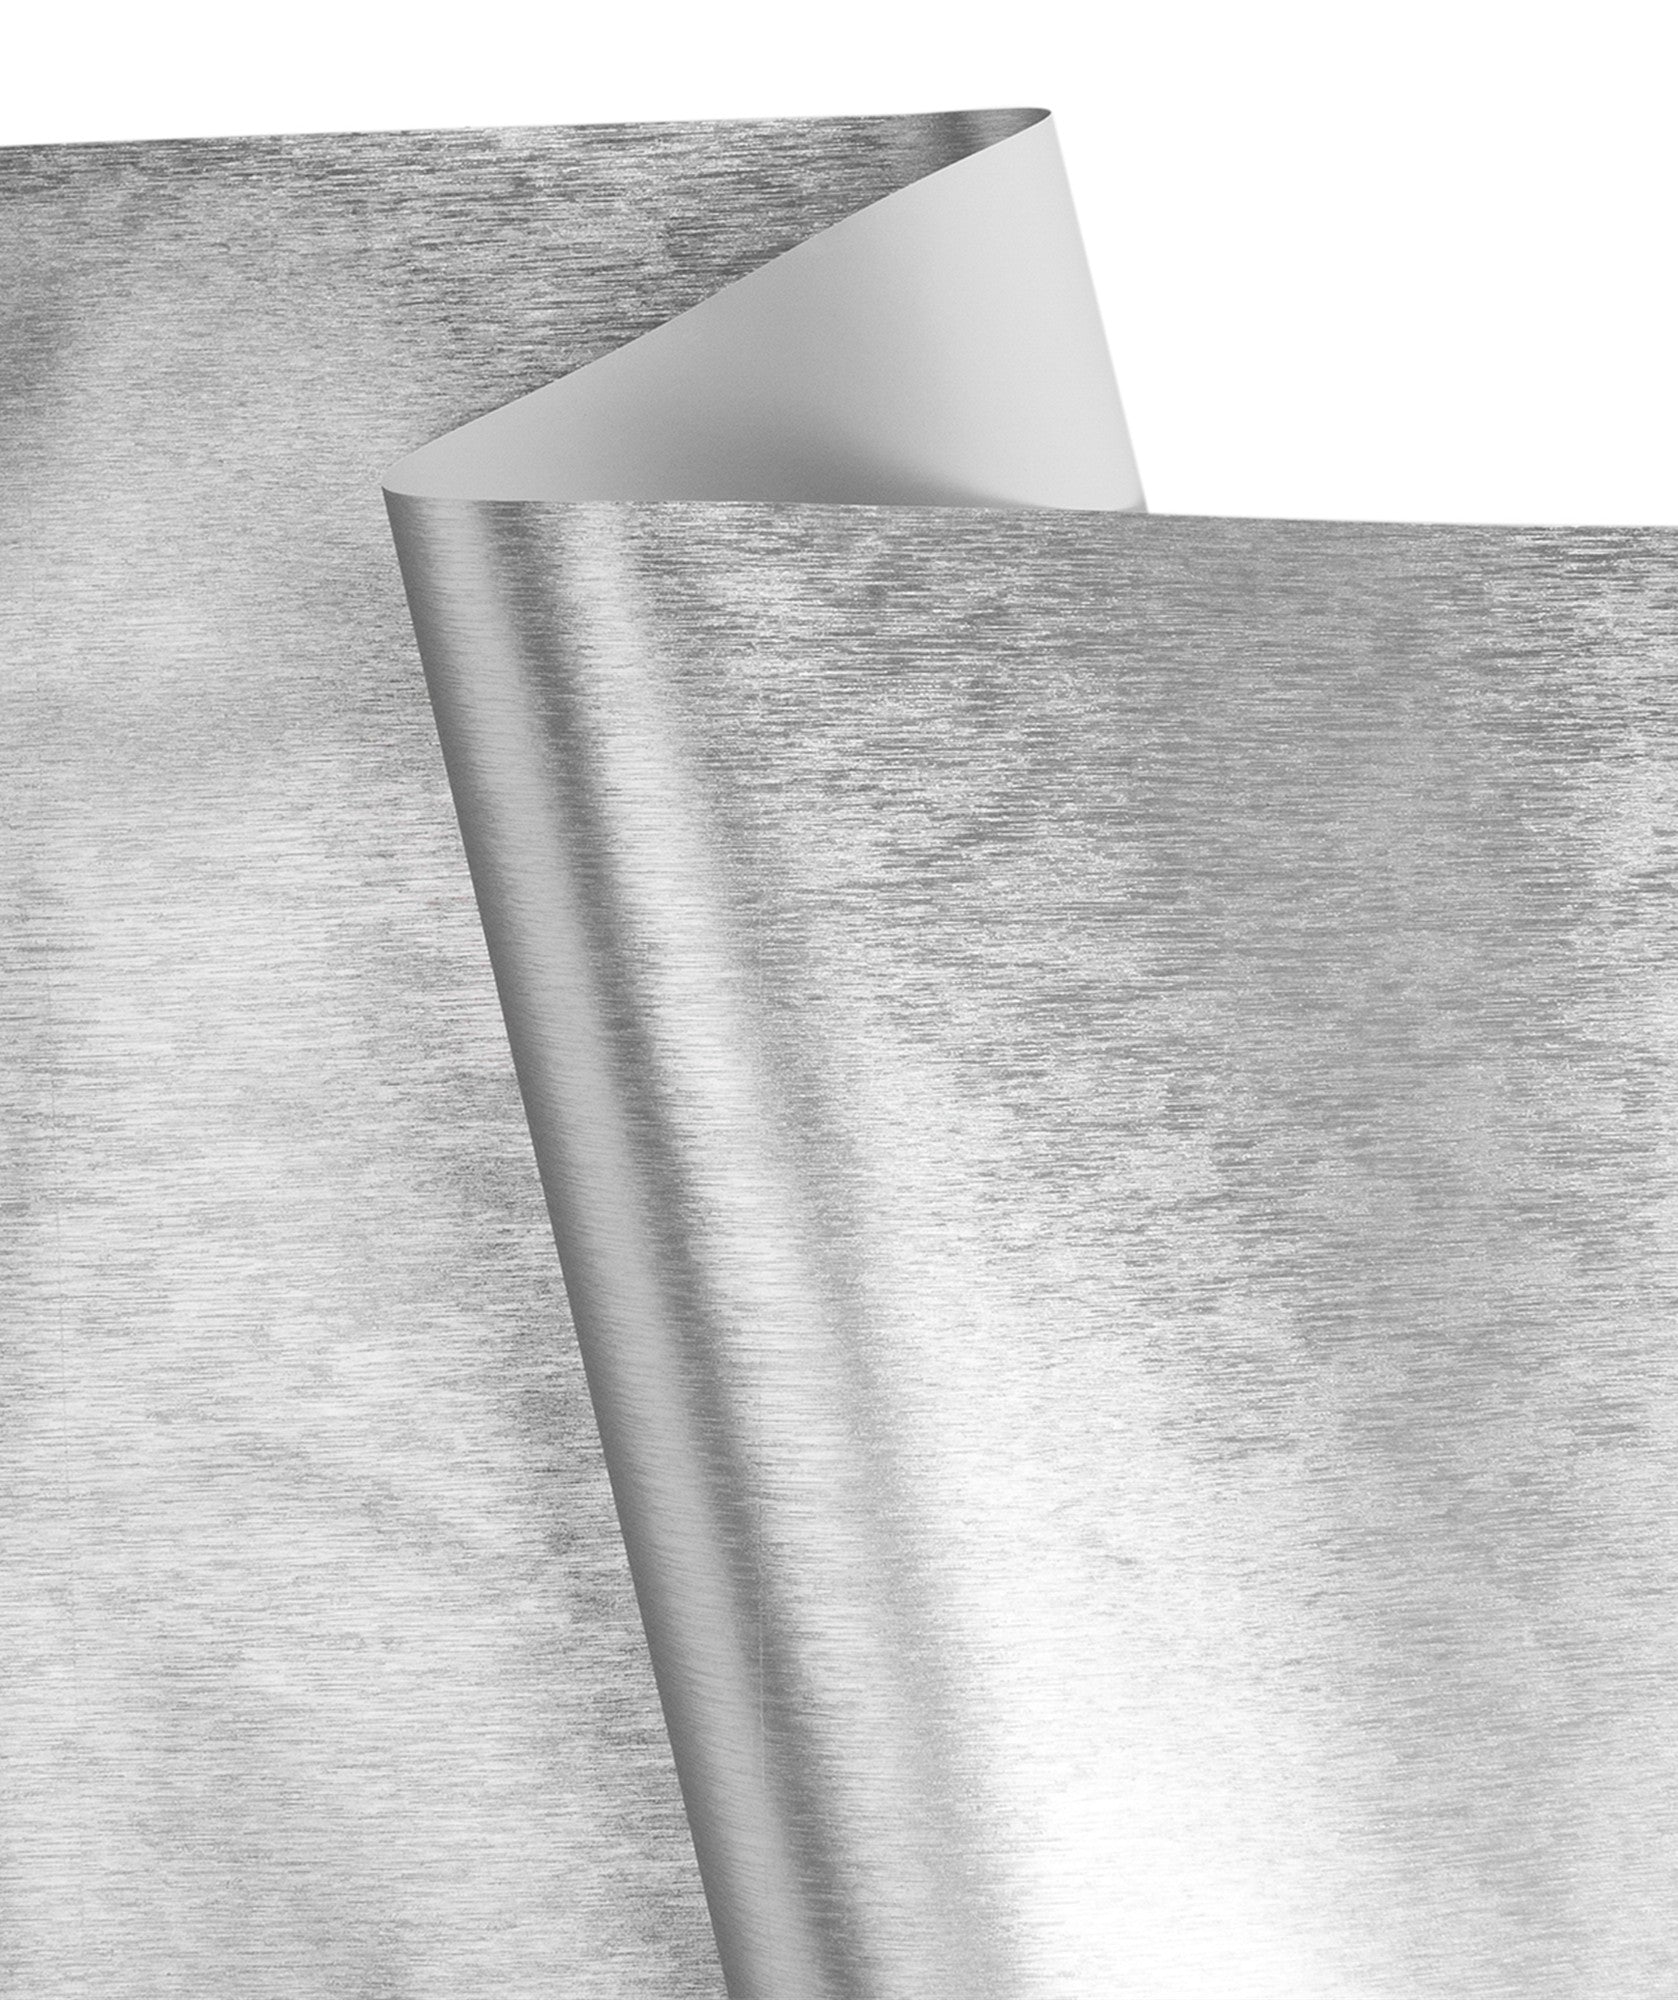 Brushed Aluminum Texture Metallic Wrapping Paper Roll Silver Ream Wholesale Wraphaholic